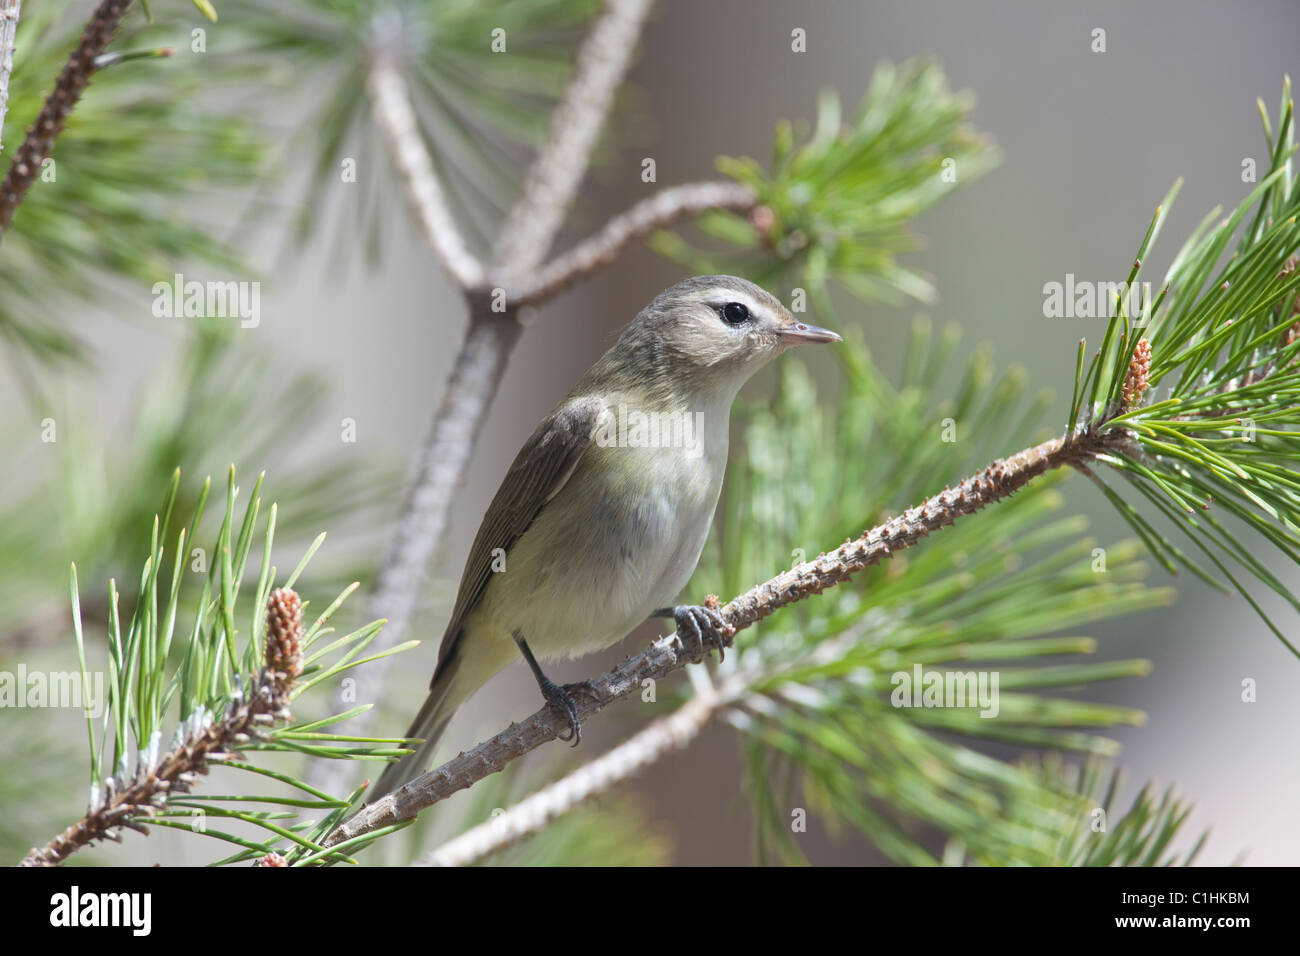 Warbling vireo (Vireo gilvus) perched on a pine branch. Stock Photo